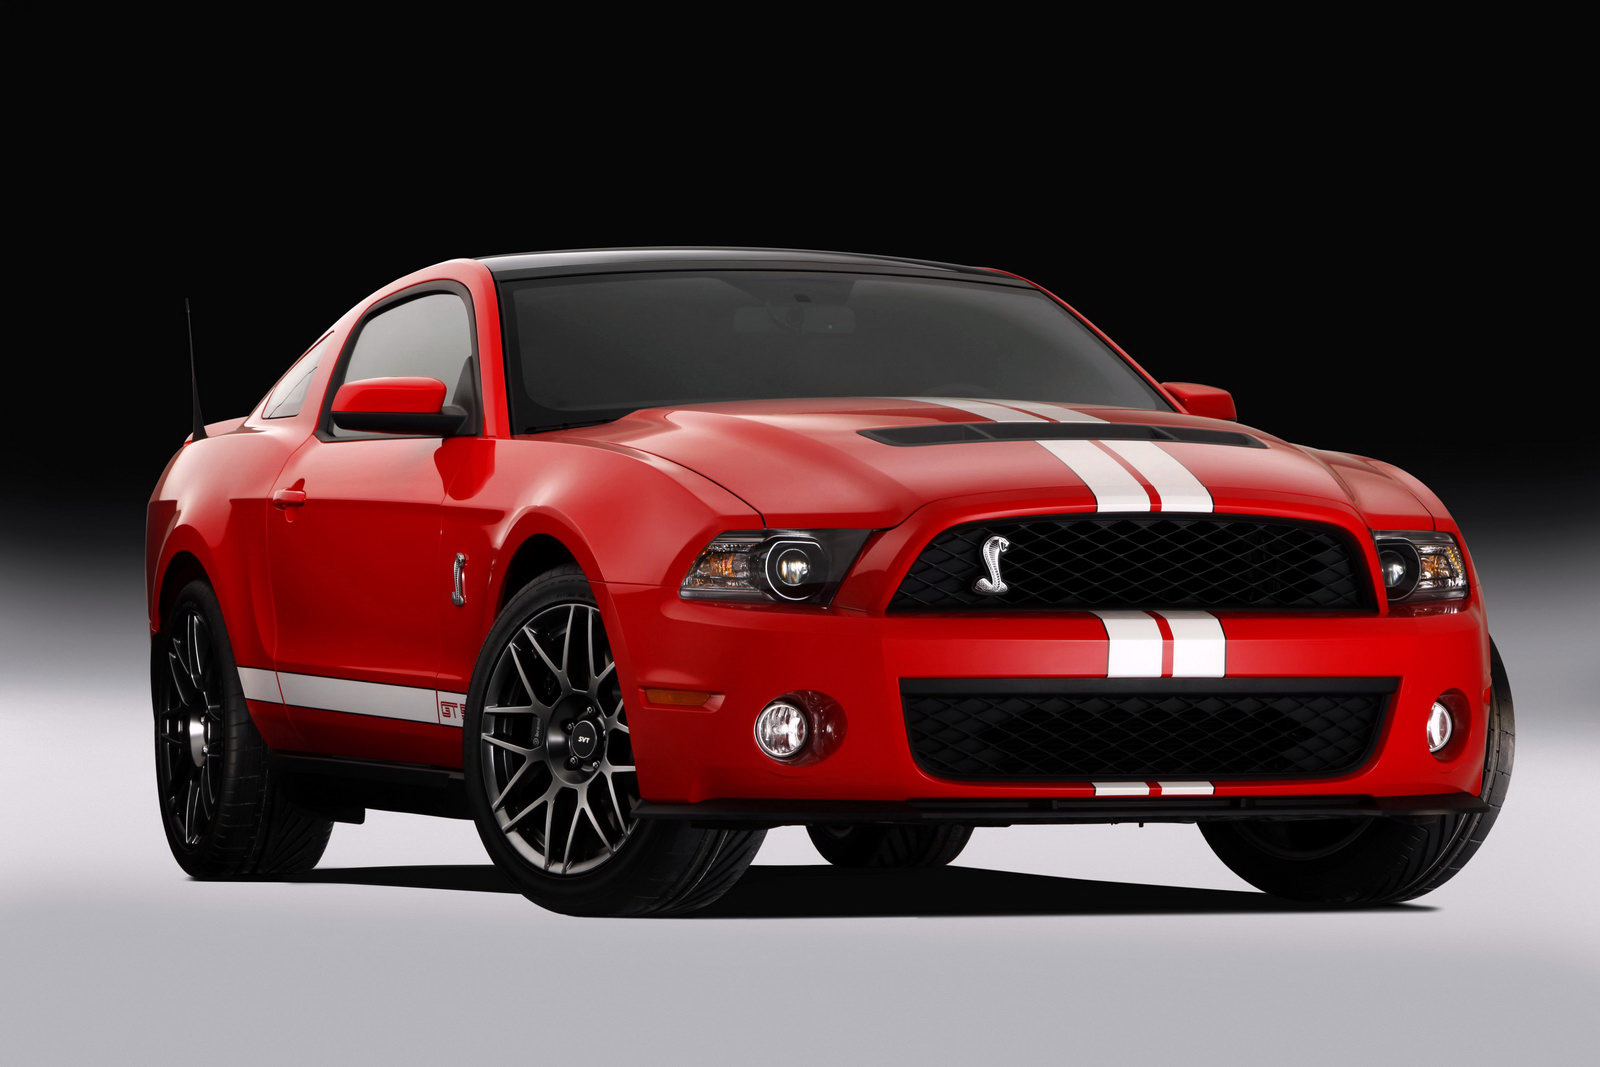 1600px 1067px Ford Shelby Gt500 Wallpaper